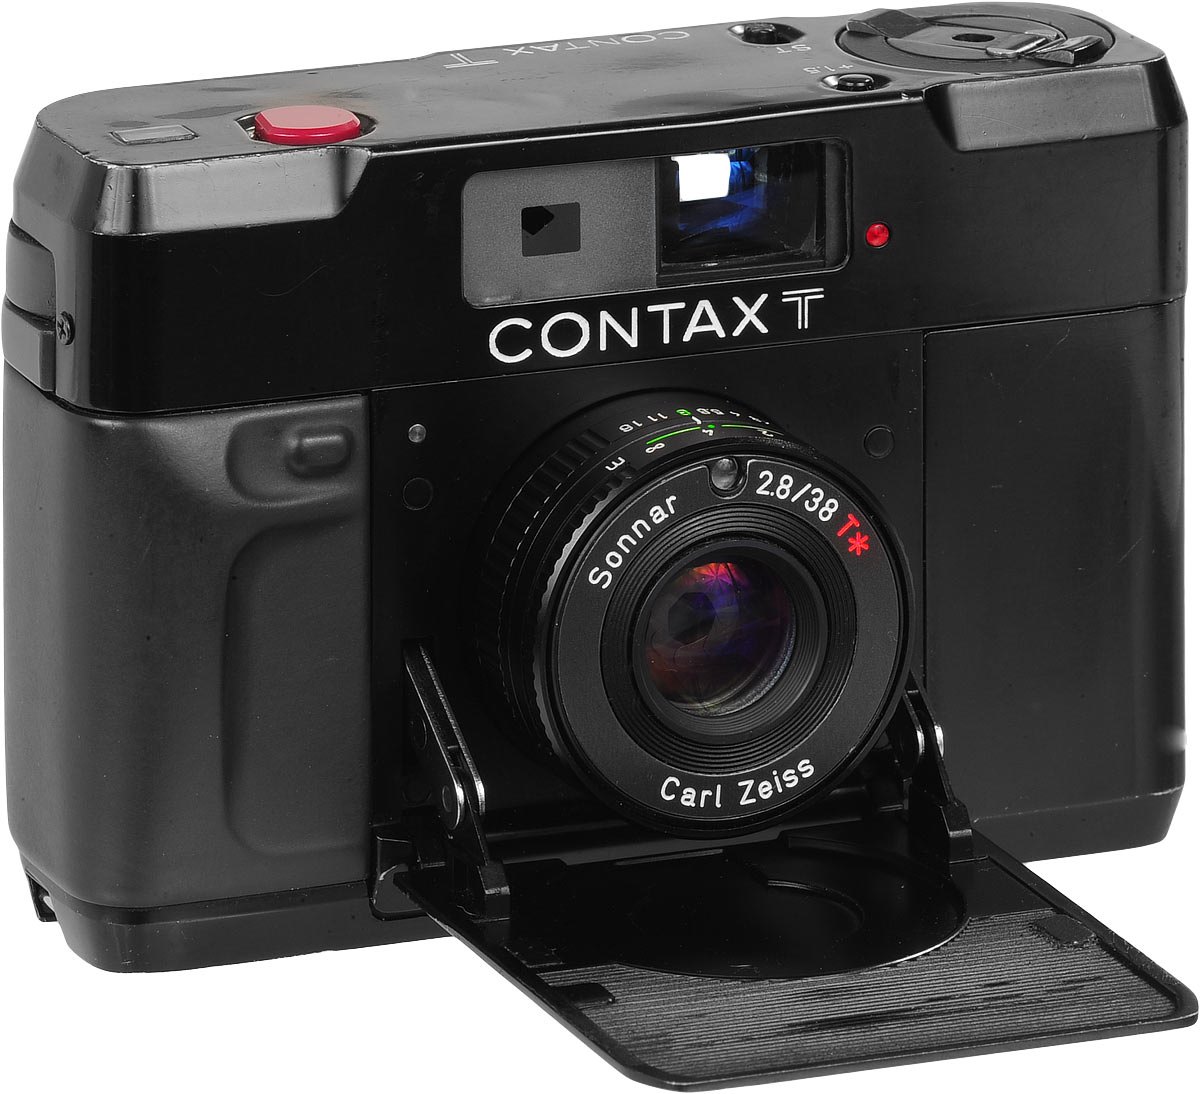 CONTAX T Review